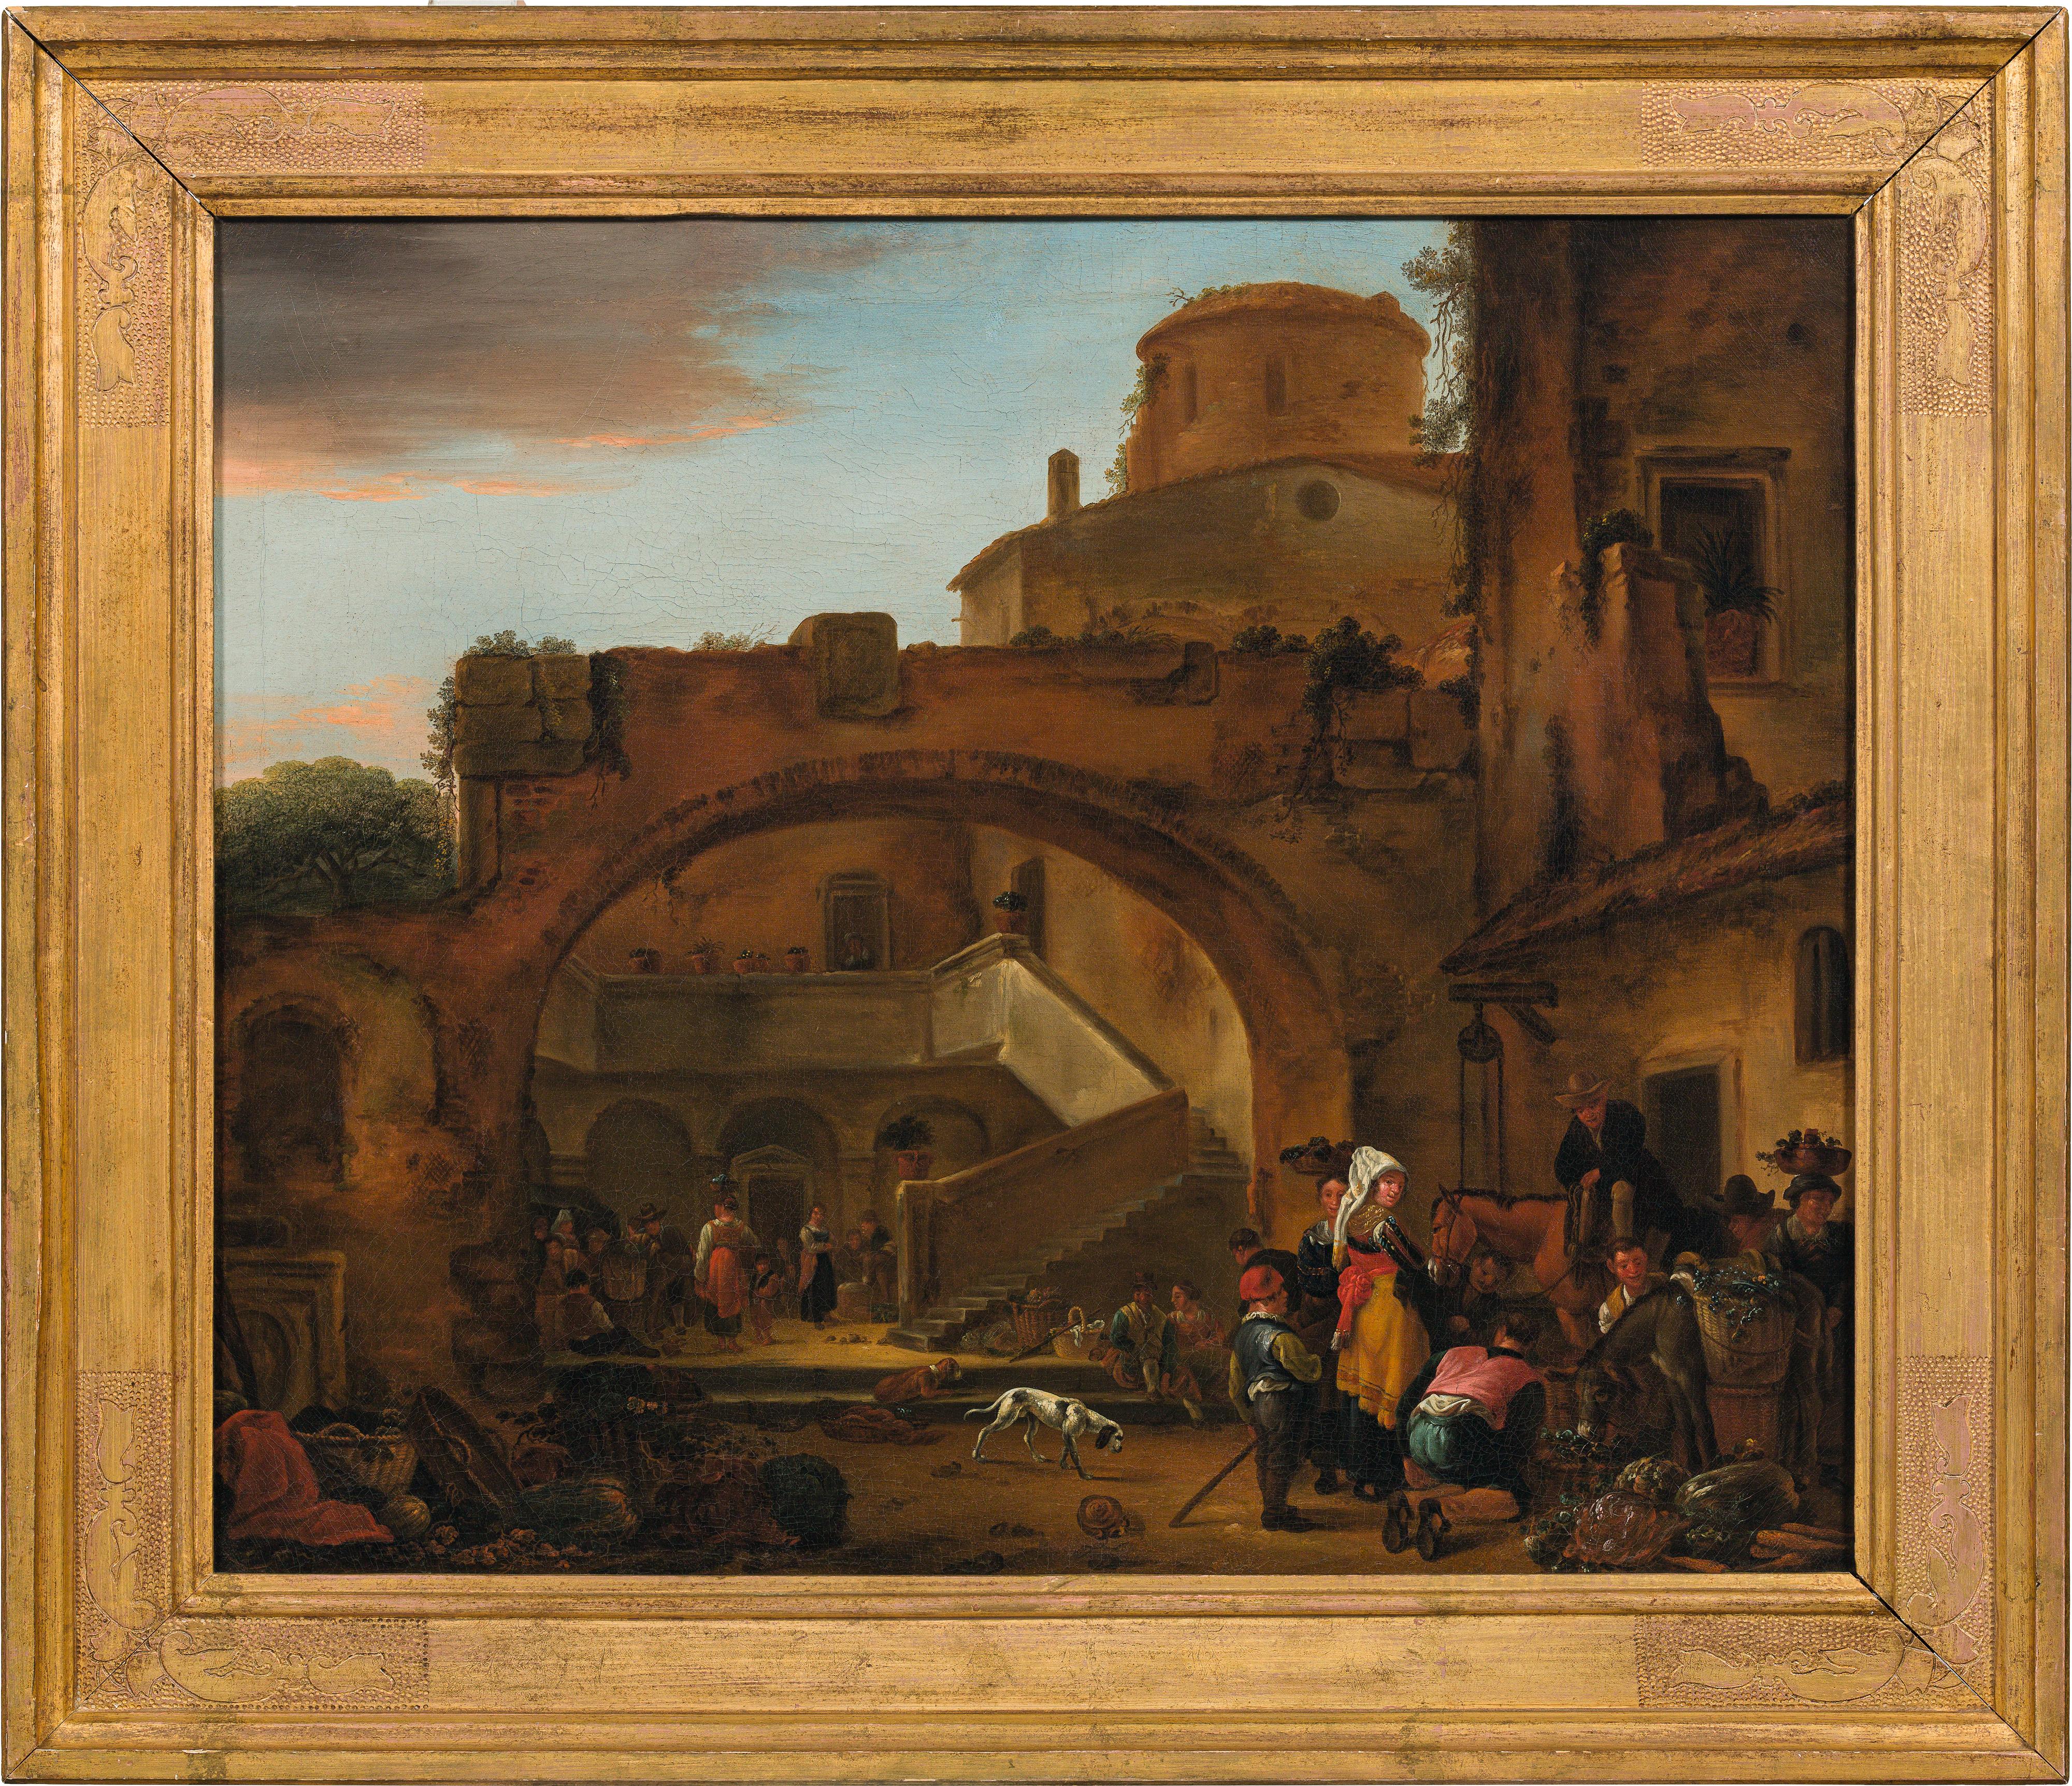 Thomas WyckPeasants and traders in Roman court architectureoil on canvas62 x 73 cmprobably remains - Image 2 of 2